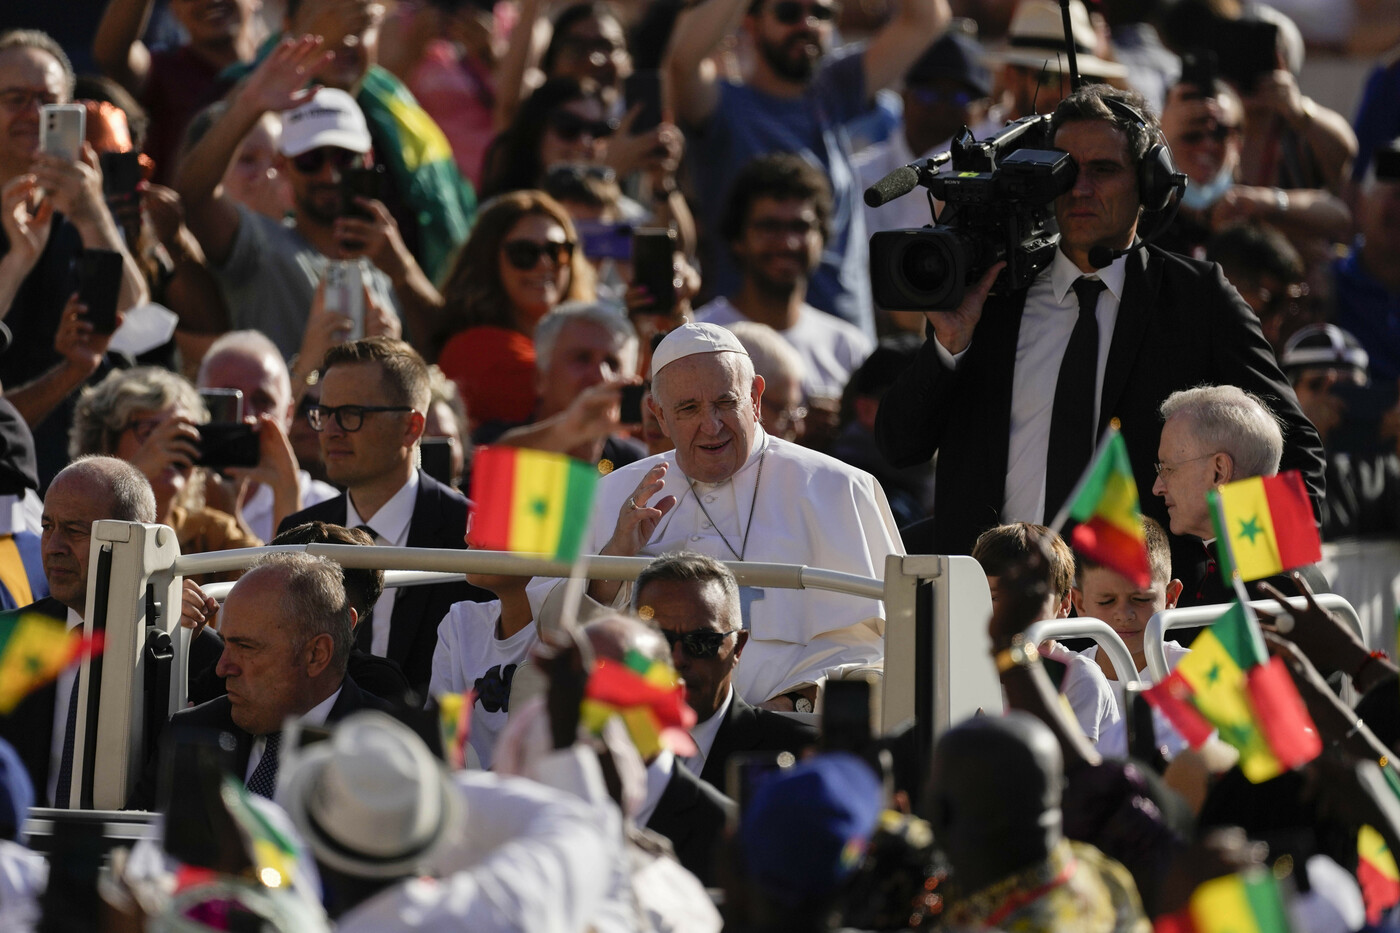 Pope Francis arrives for his weekly general audience in St. Peter's Square, at the Vatican, Wednesday, Sept. 7, 2022. (AP Photo/Alessandra Tarantino)